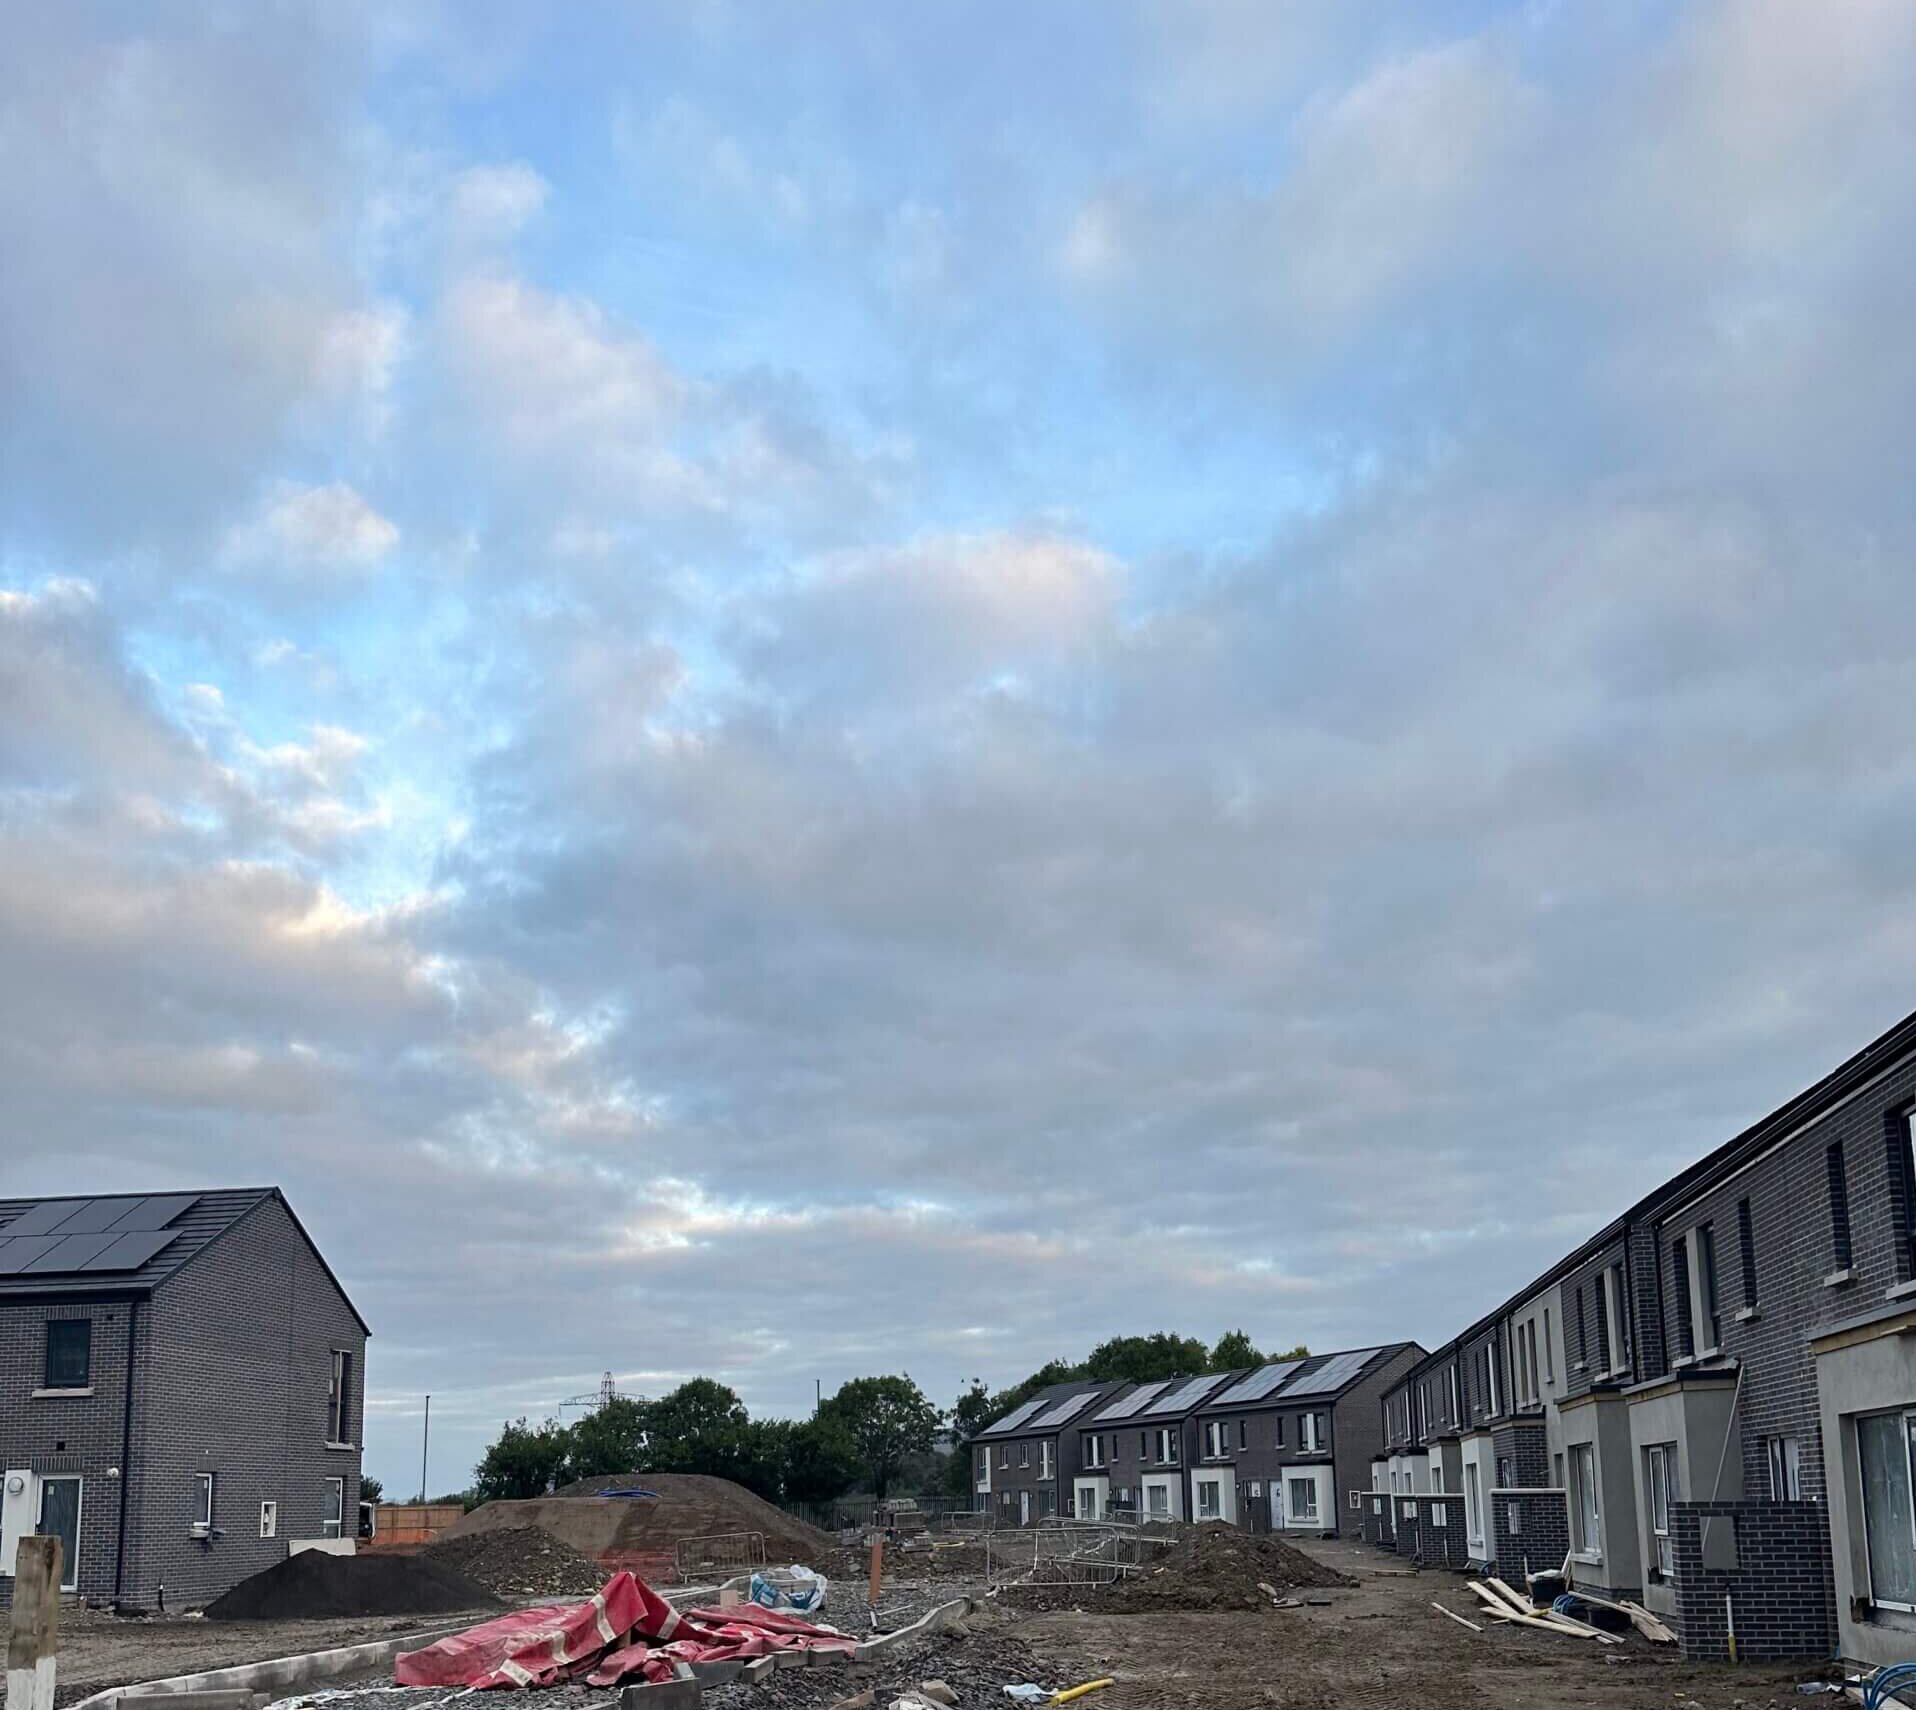 20230923 065224750 iOS scaled e1695903668956 - Project Update: Buncrana Road, Derry